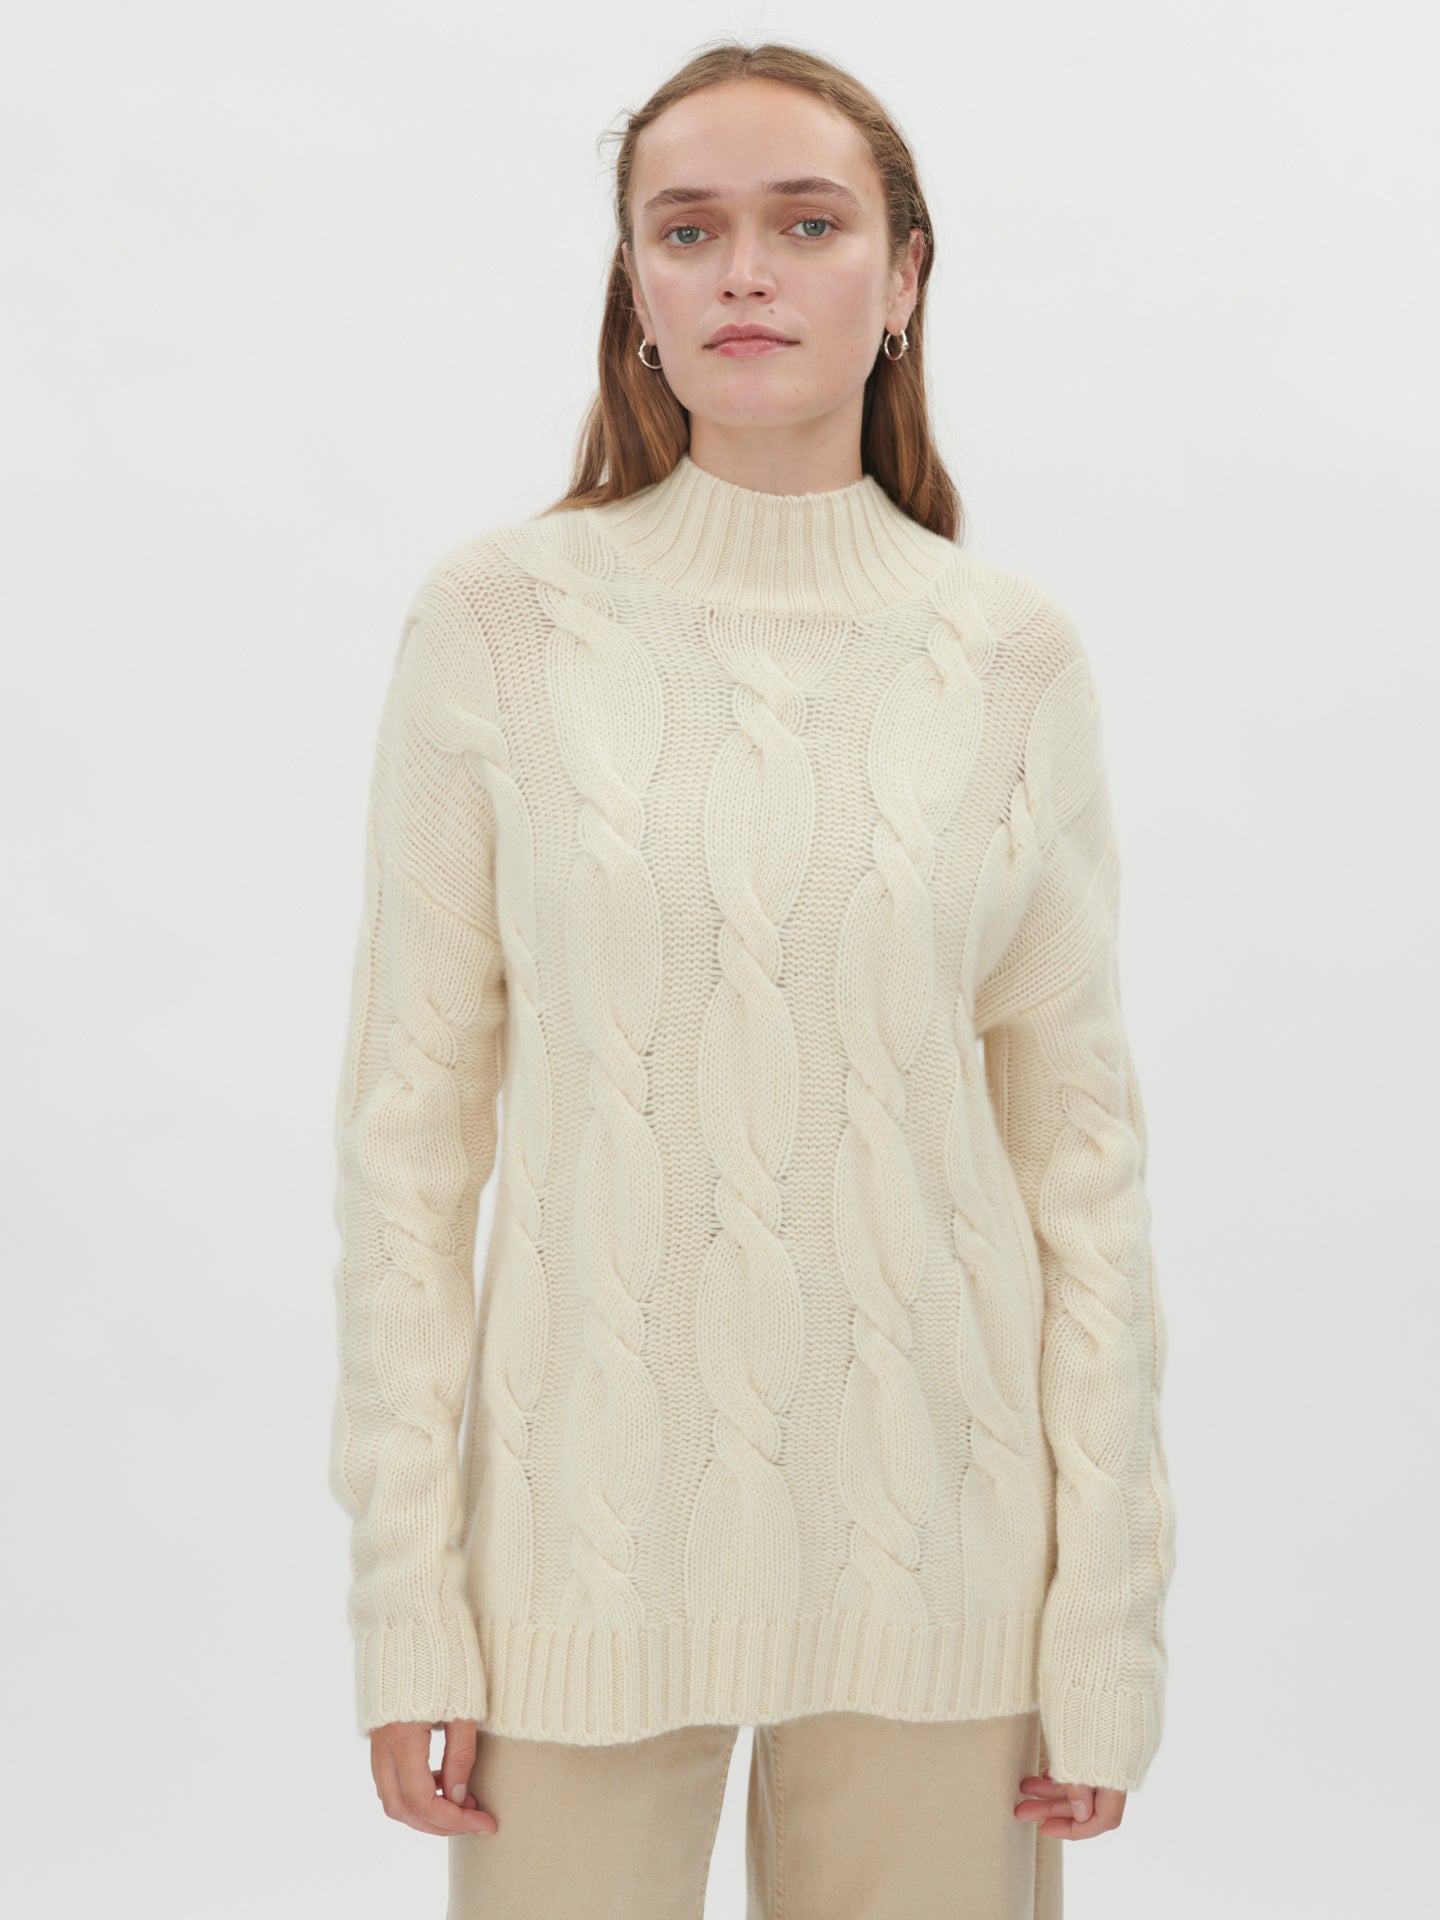 Women's Cashmere Cable Knitted Turtle Neck White - Gobi Cashmere